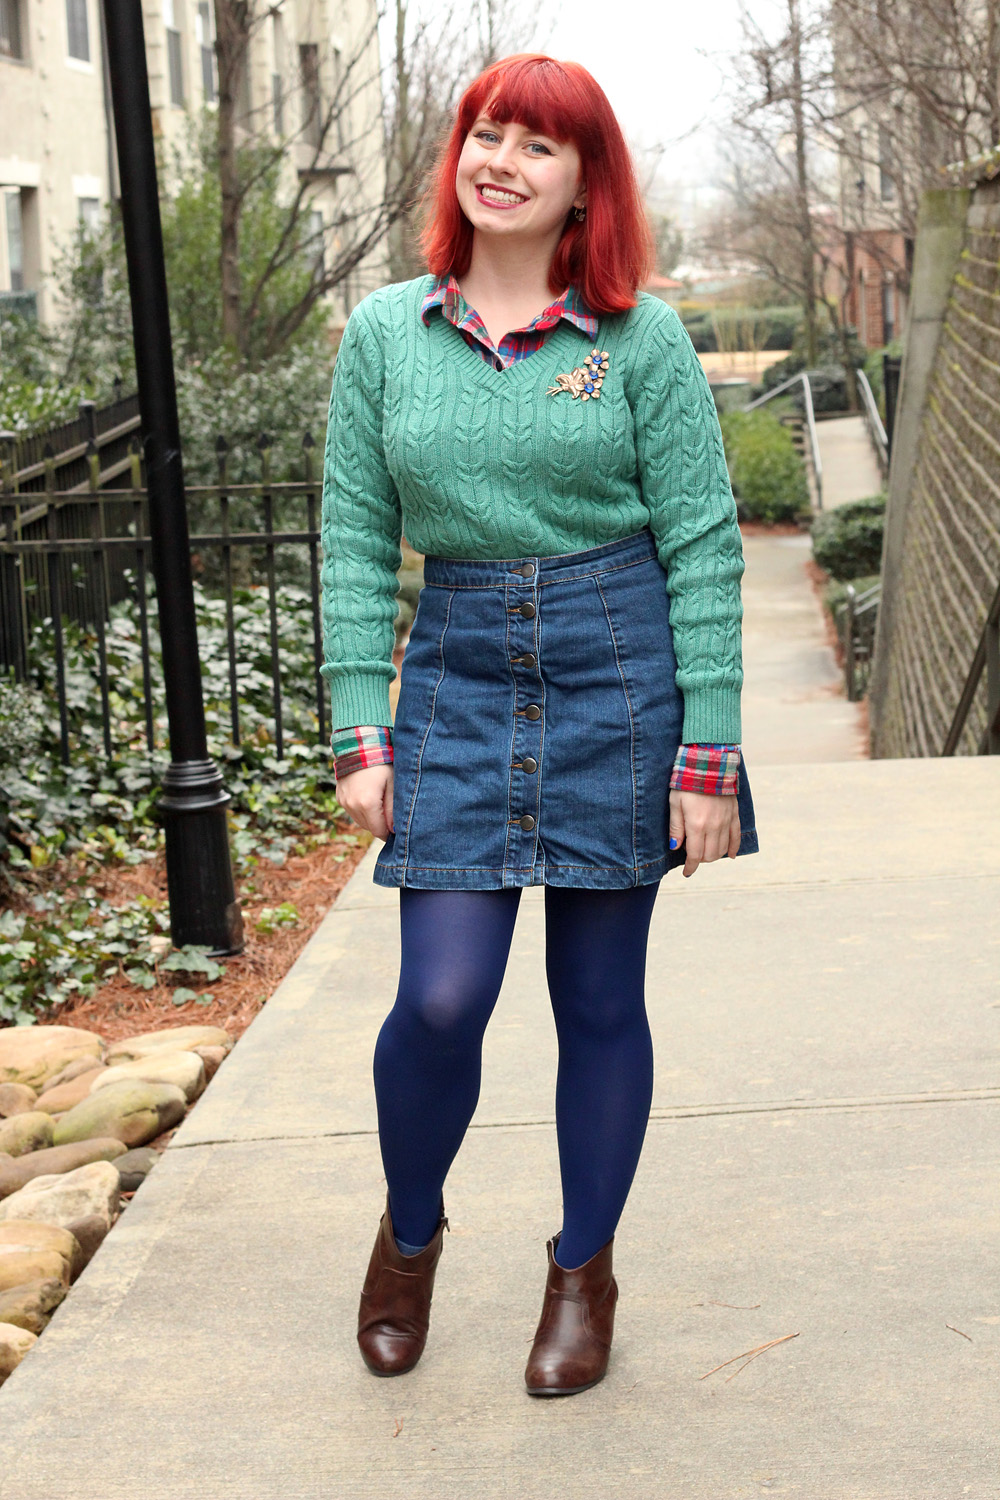 Outfit: Seafoam Cable Knit Sweater over a Flannel Top, Denim ...